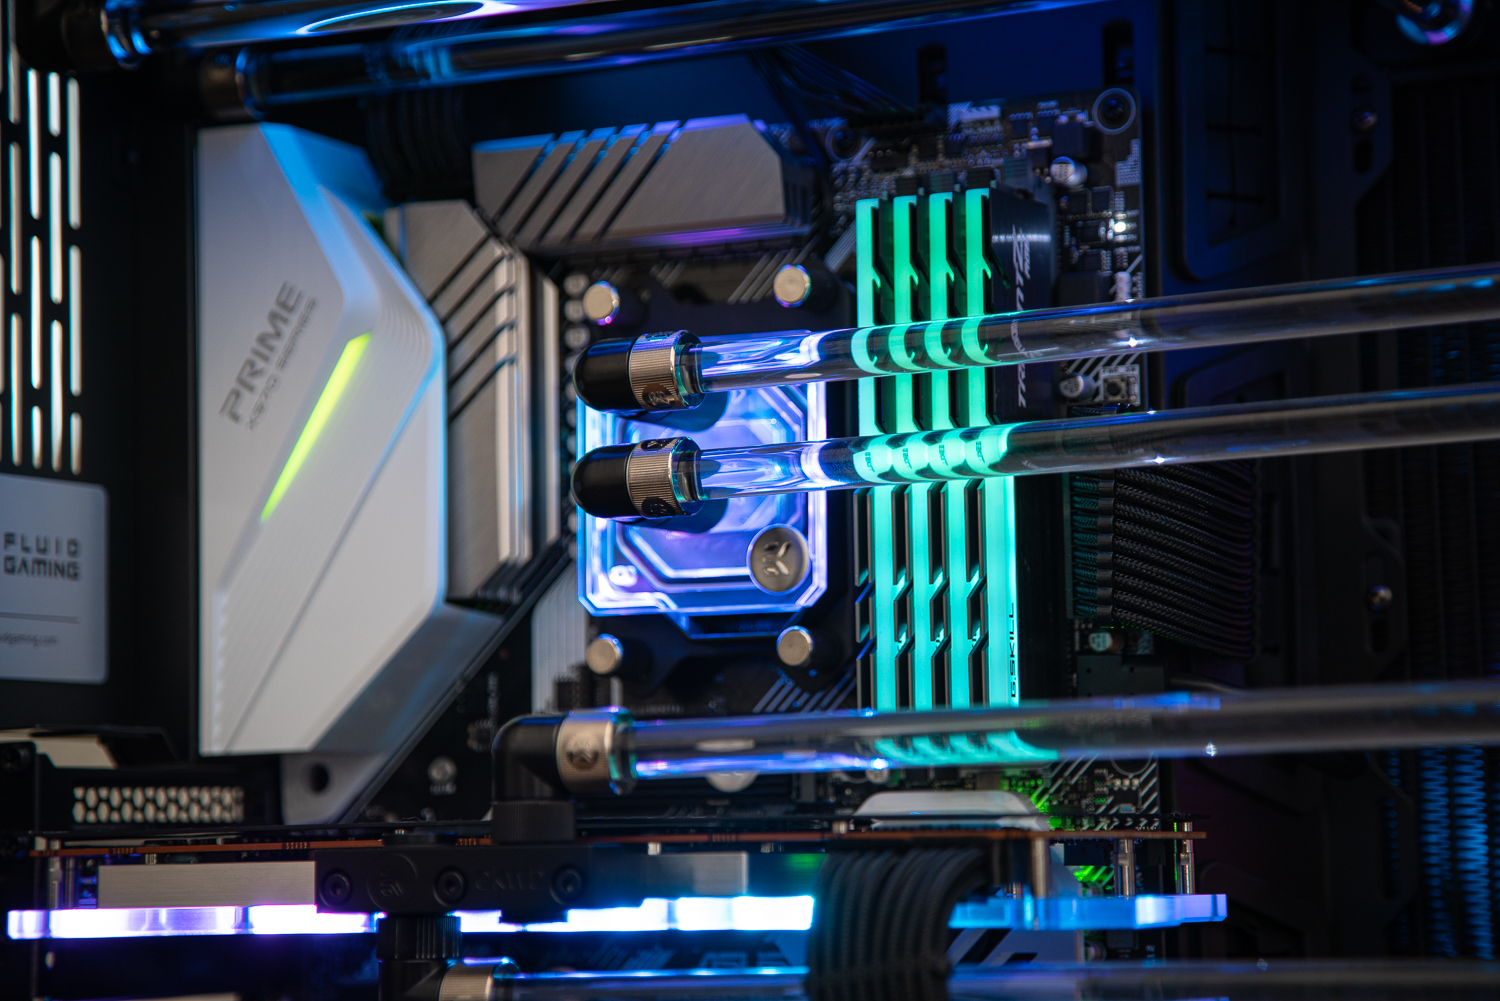 What is the best UV water-cooling coolant?